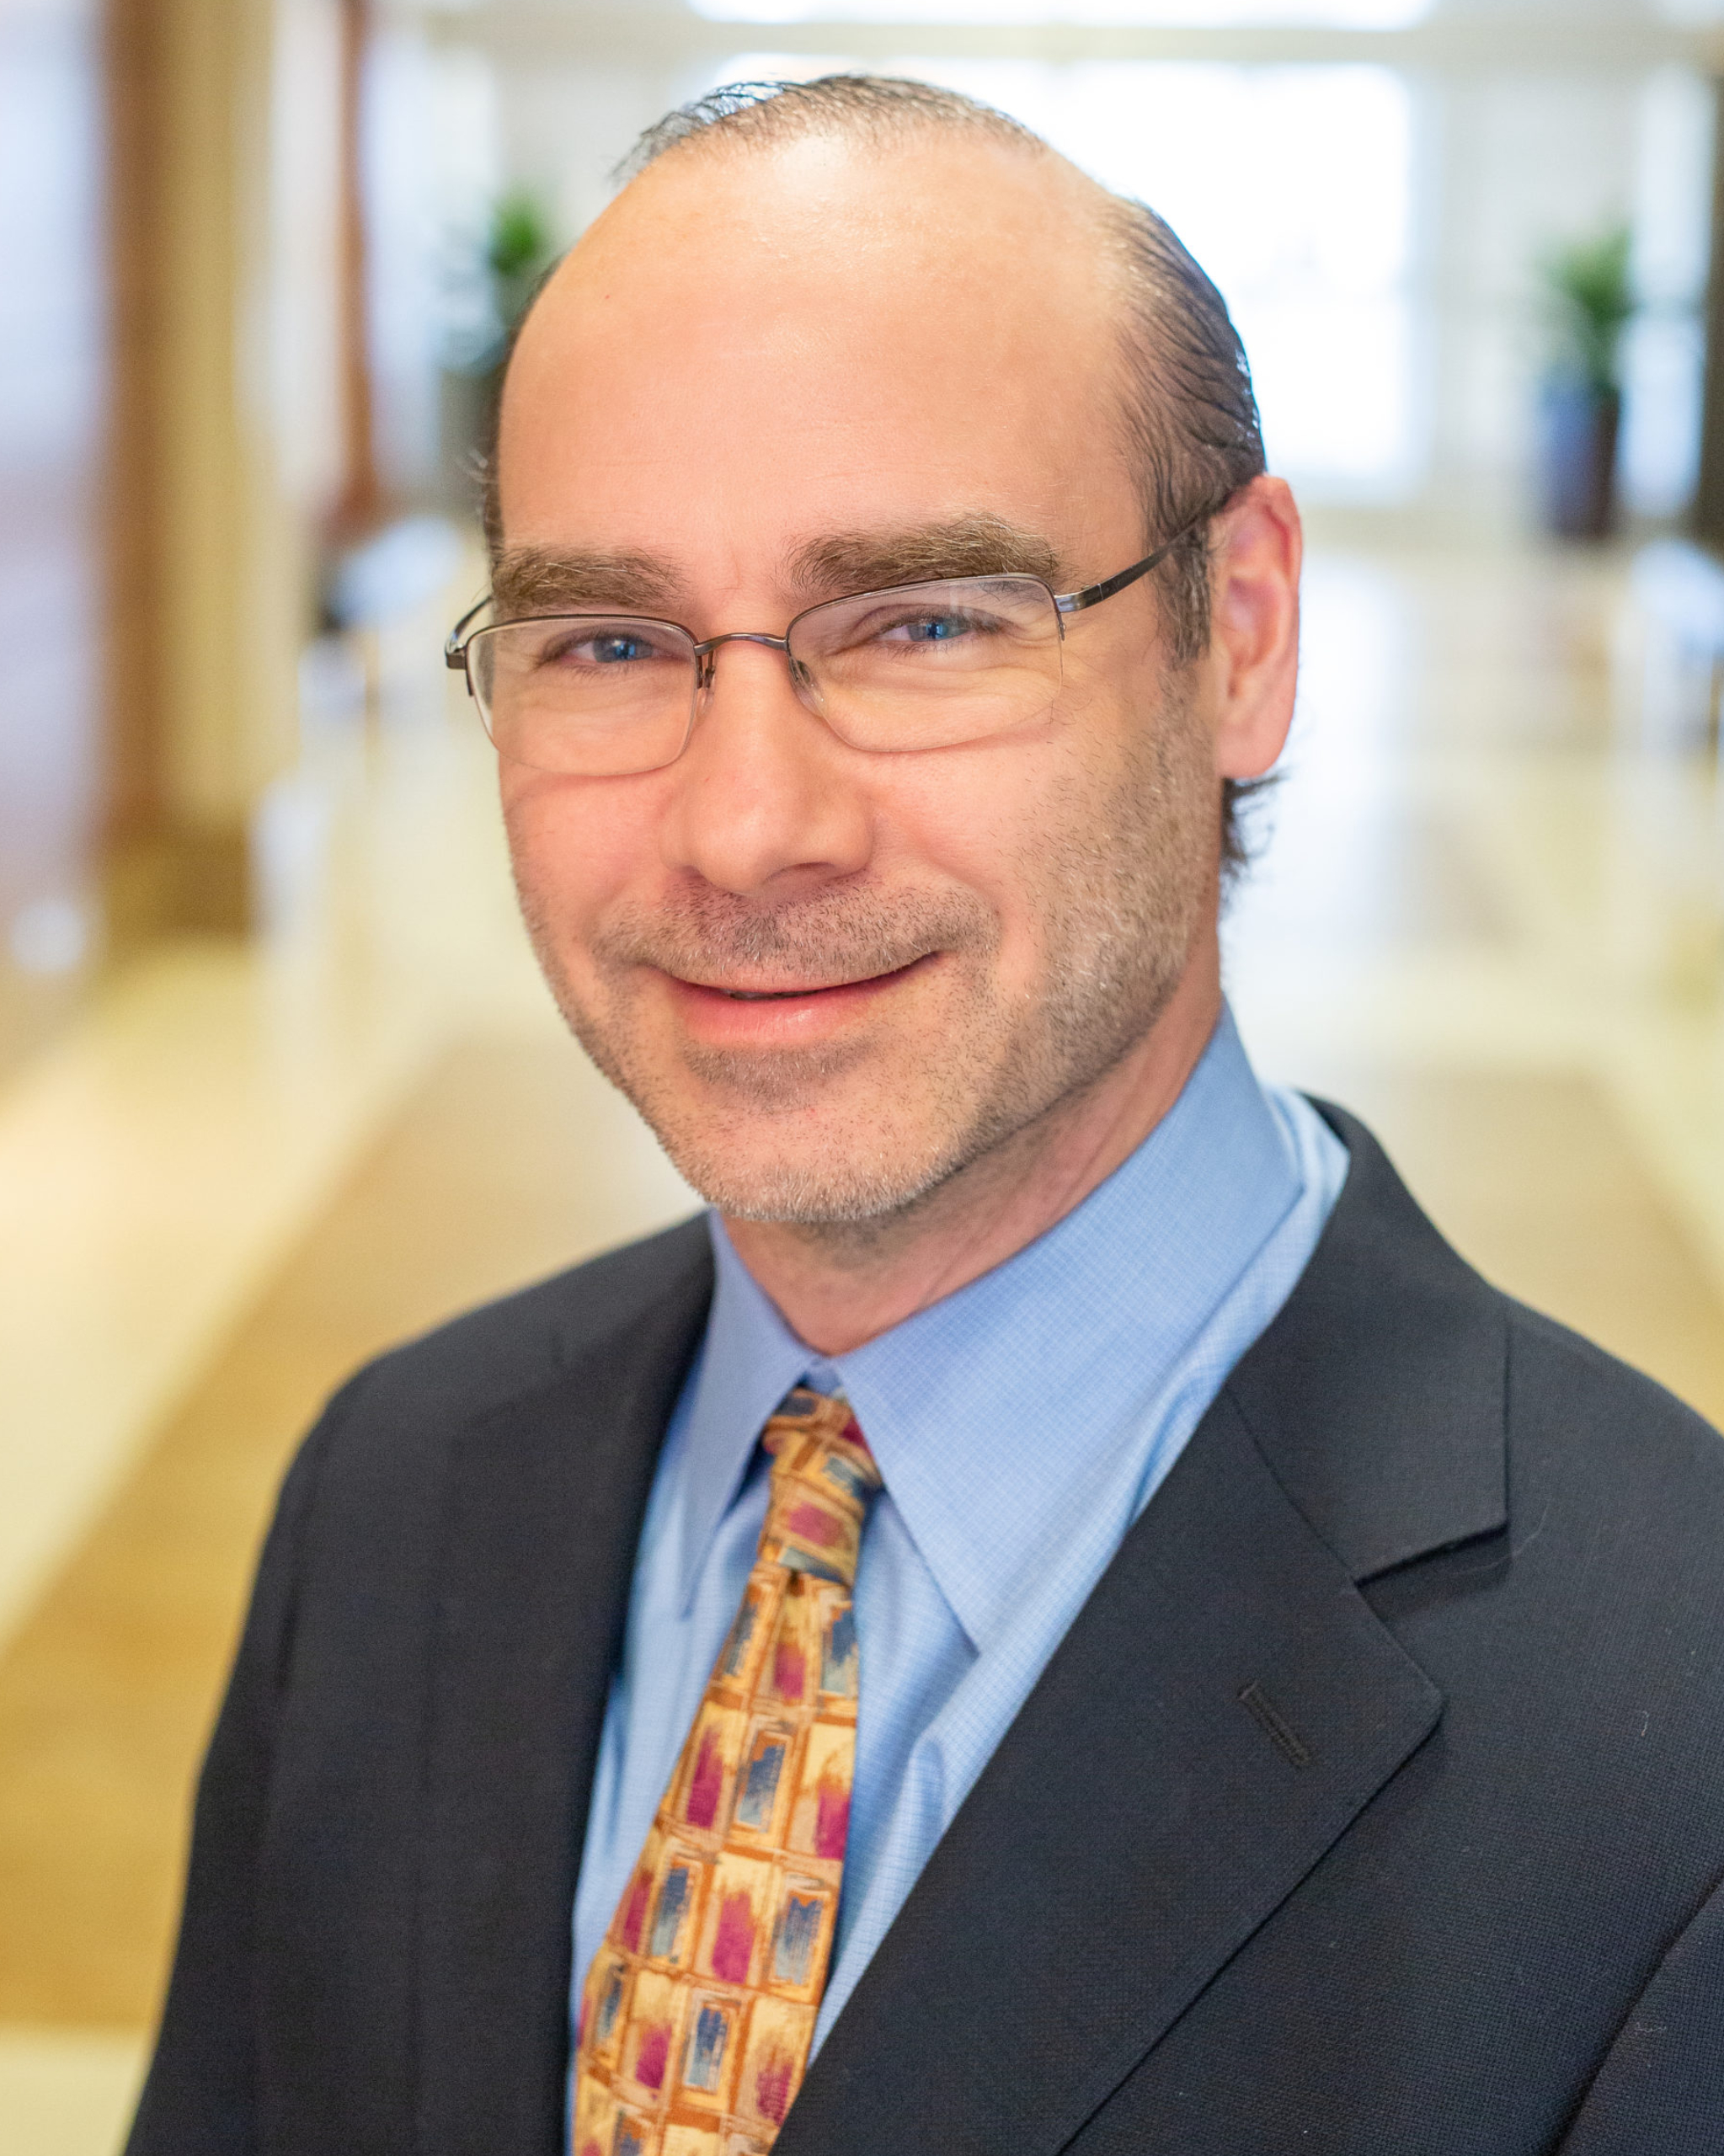 Kenneth S. Weiss, MD